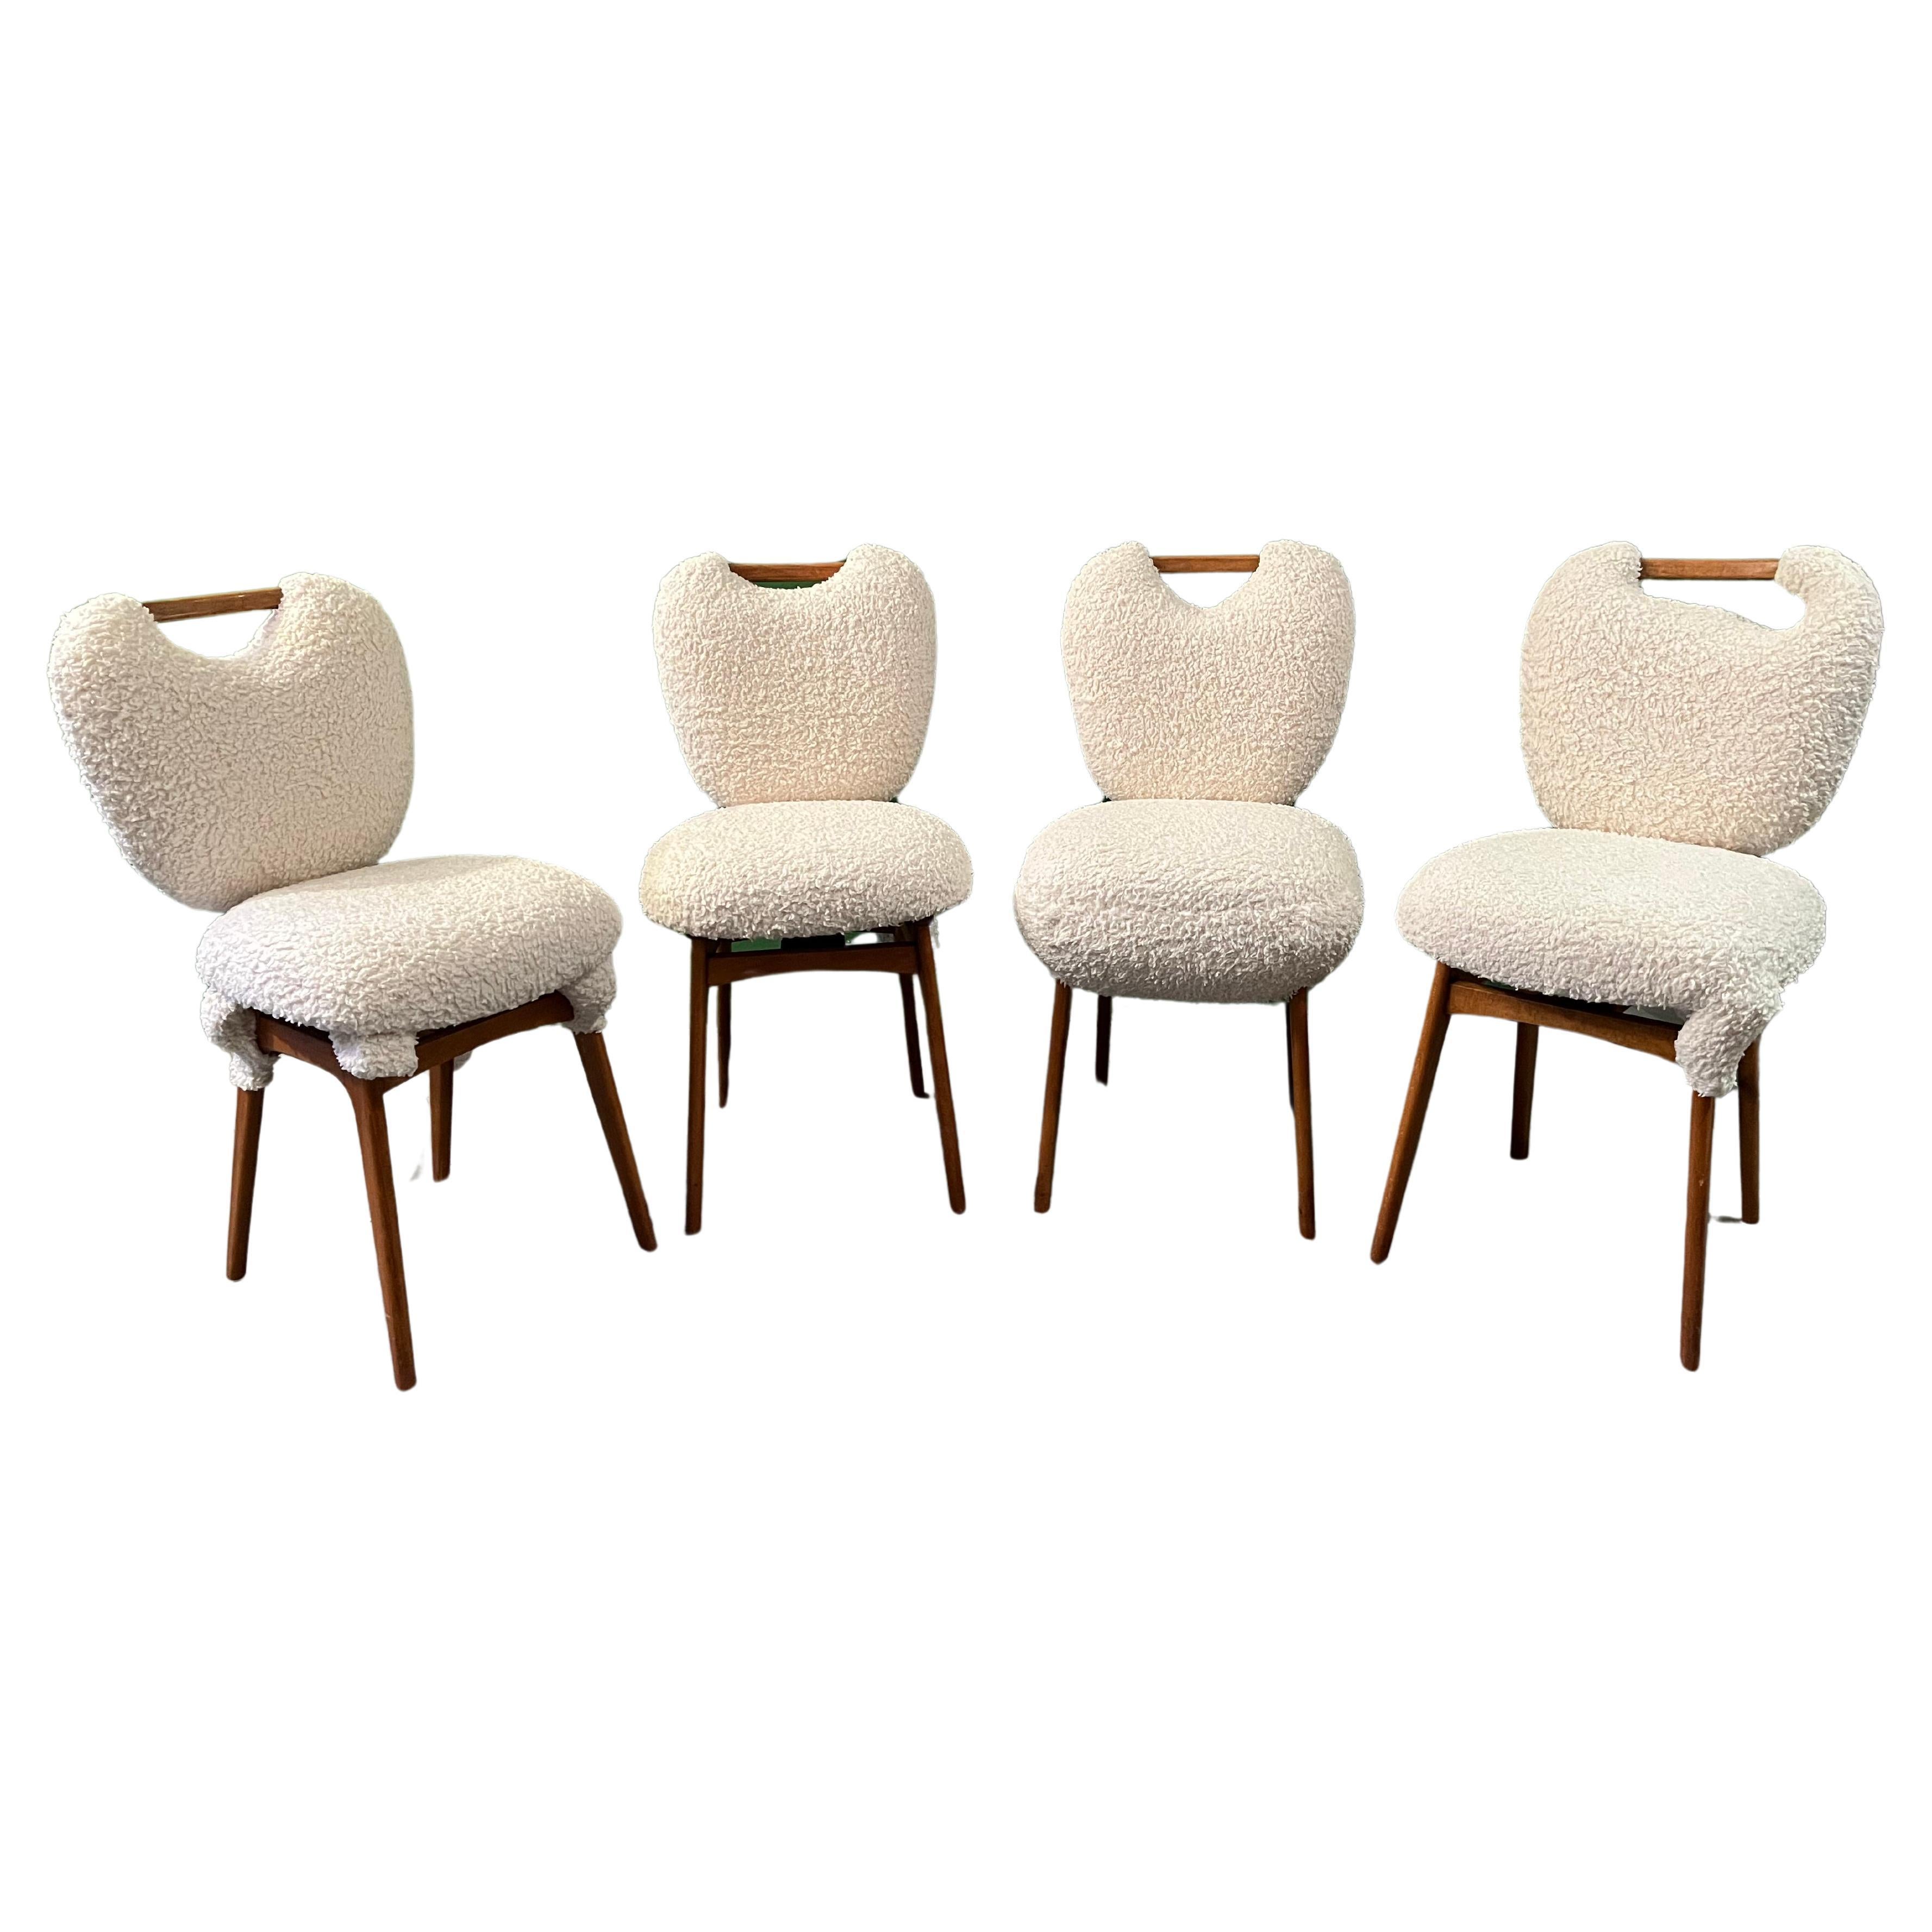 The 4 Bio-teddy/lamb-teddy dining room chair are all different. Upholstered in thick teddy, alterations made, very comforfortable. The idea was to give a traditional design a super contemporary style, make them one of a kind functional design